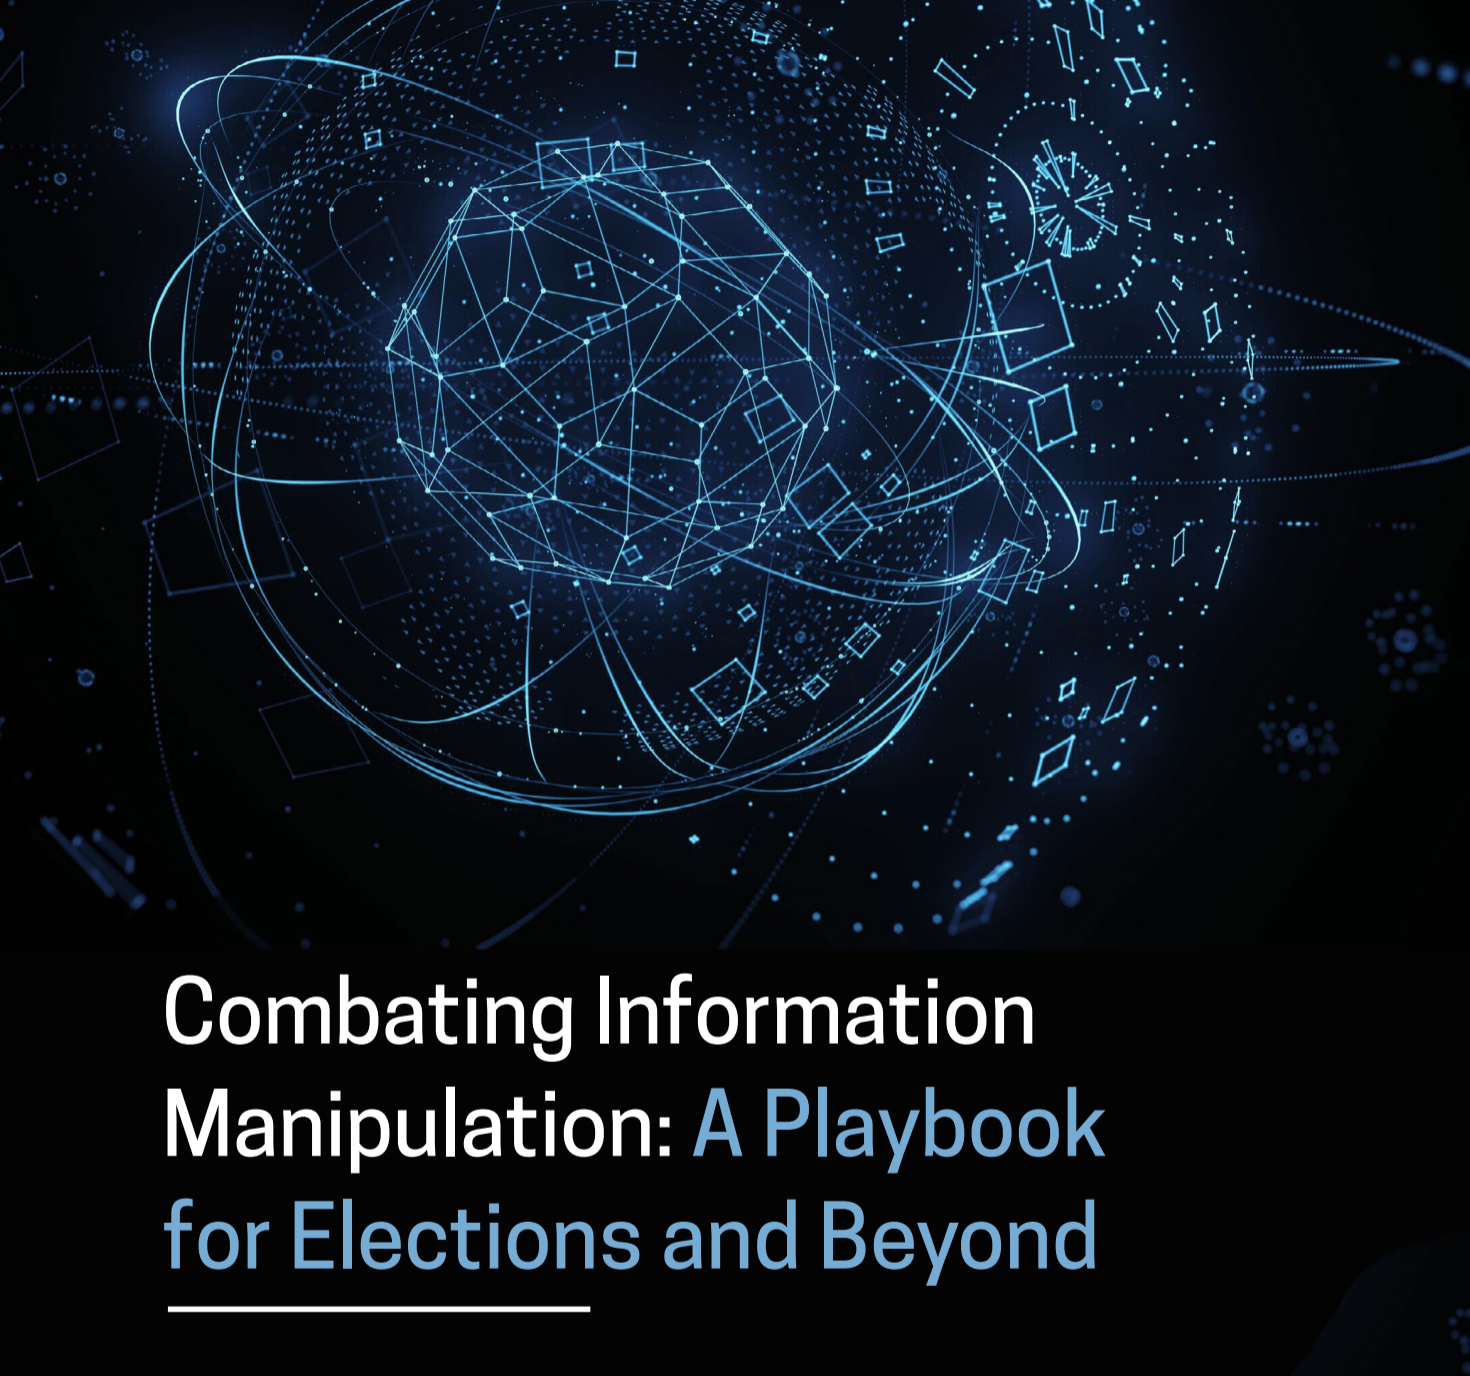 Combating Information Manipulation: A Playbook for Elections and